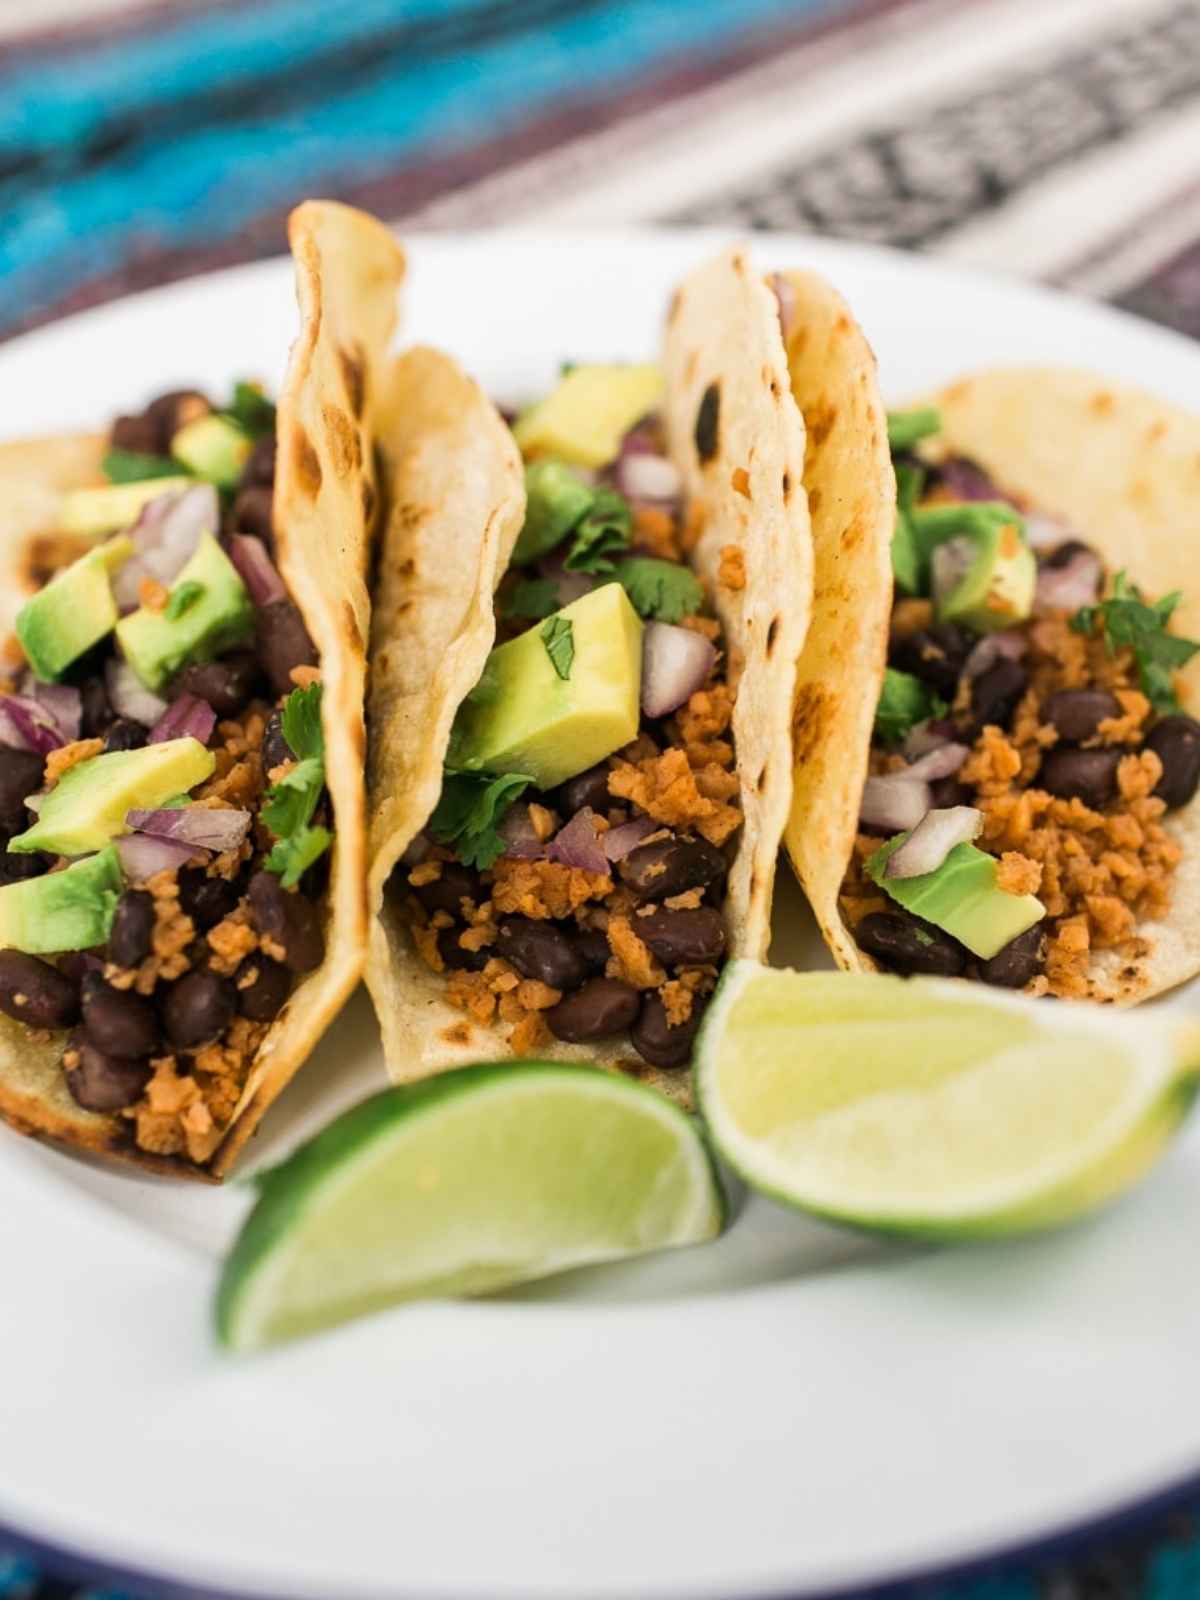 vegan tacos filled with beans